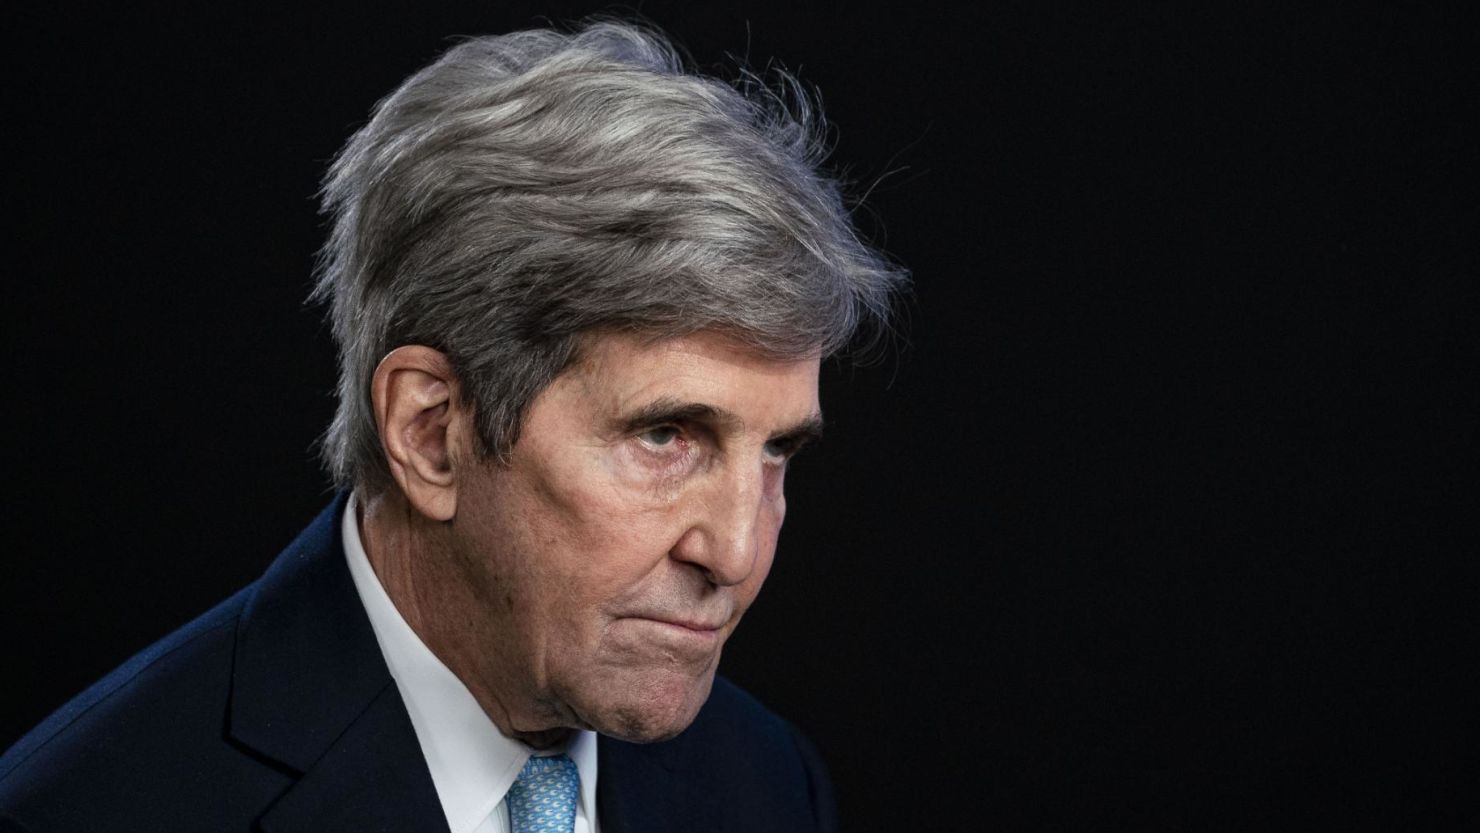 John Kerry's message is simple: The climate crisis cannot take a backseat while the world navigates the energy crisis brought on by Russia's war in Ukraine.